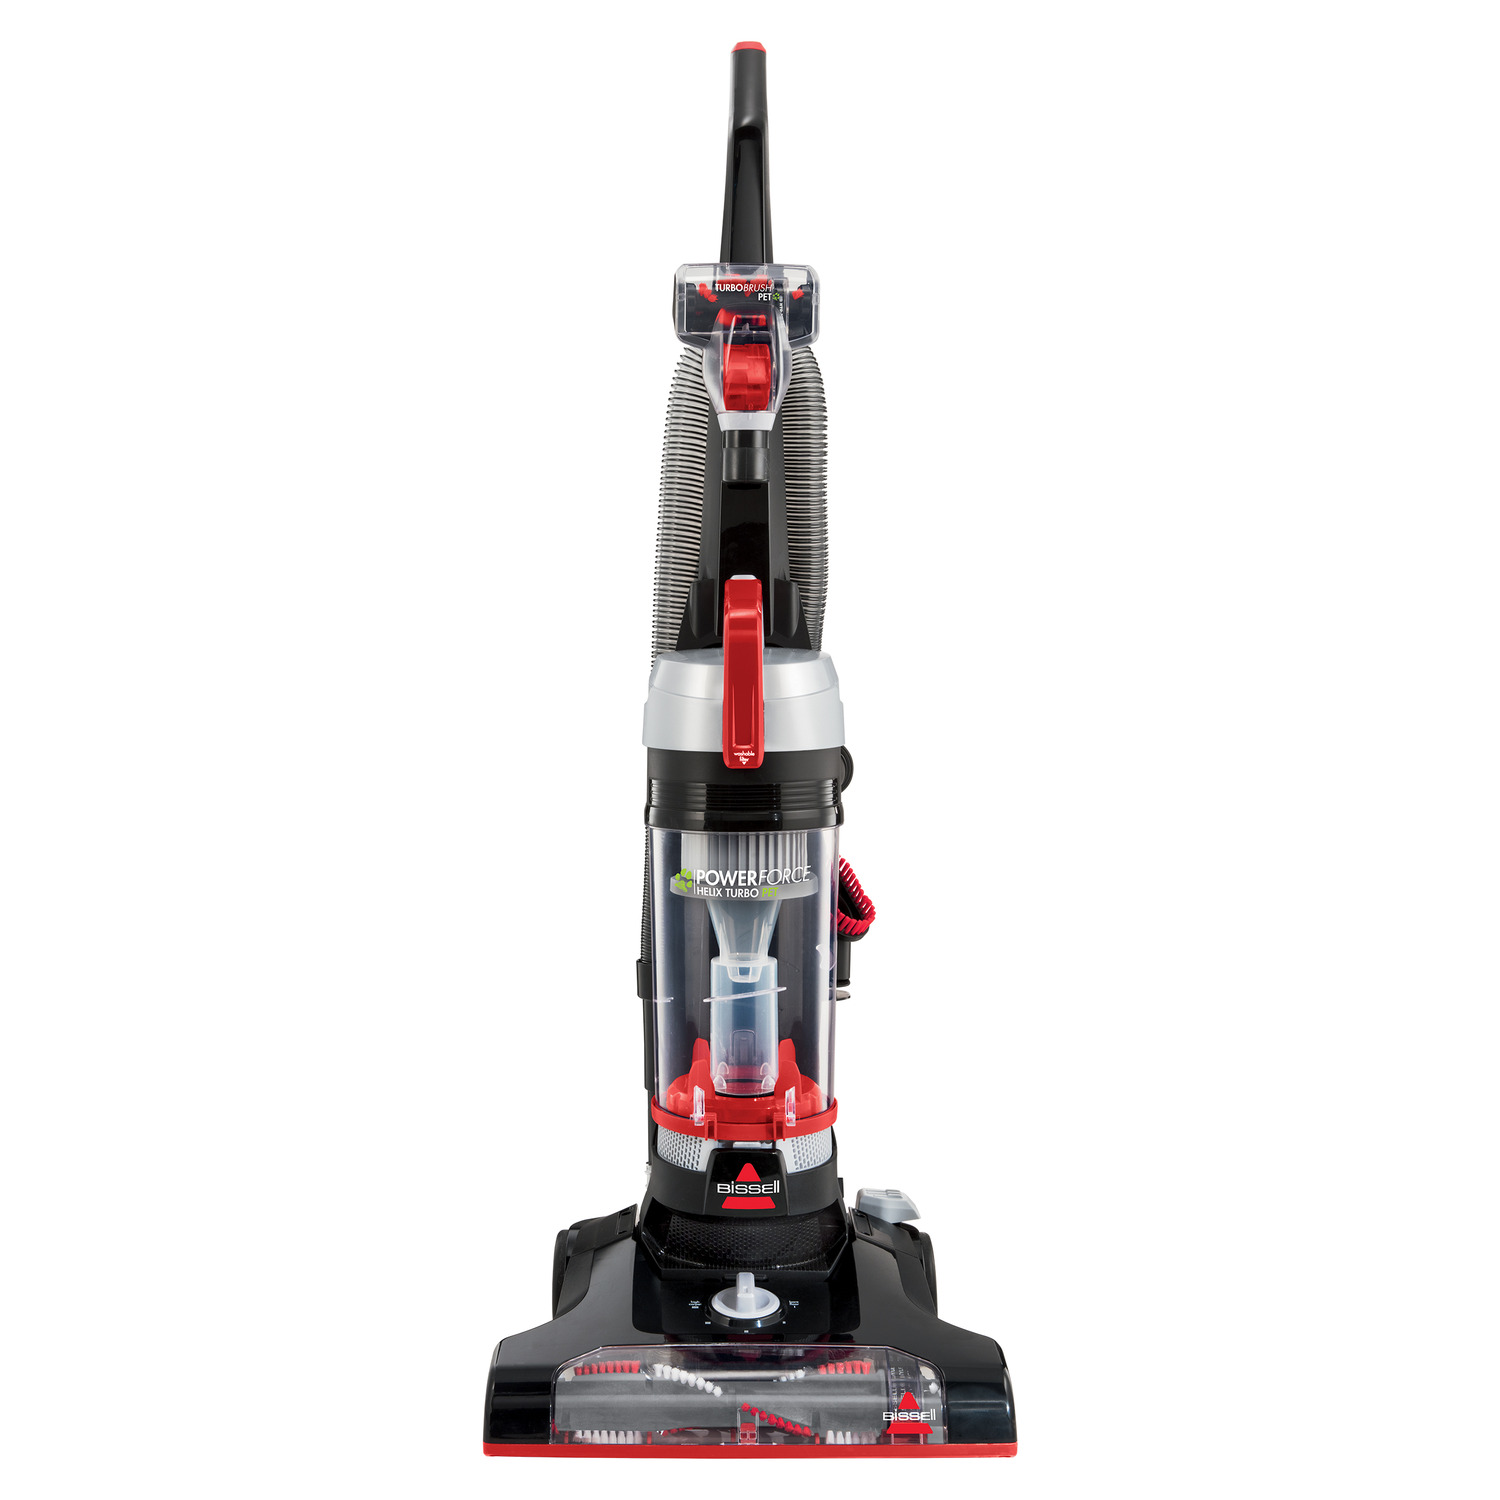 BISSELL Power Force Helix Turbo Bagless Upright Vacuum, 2190